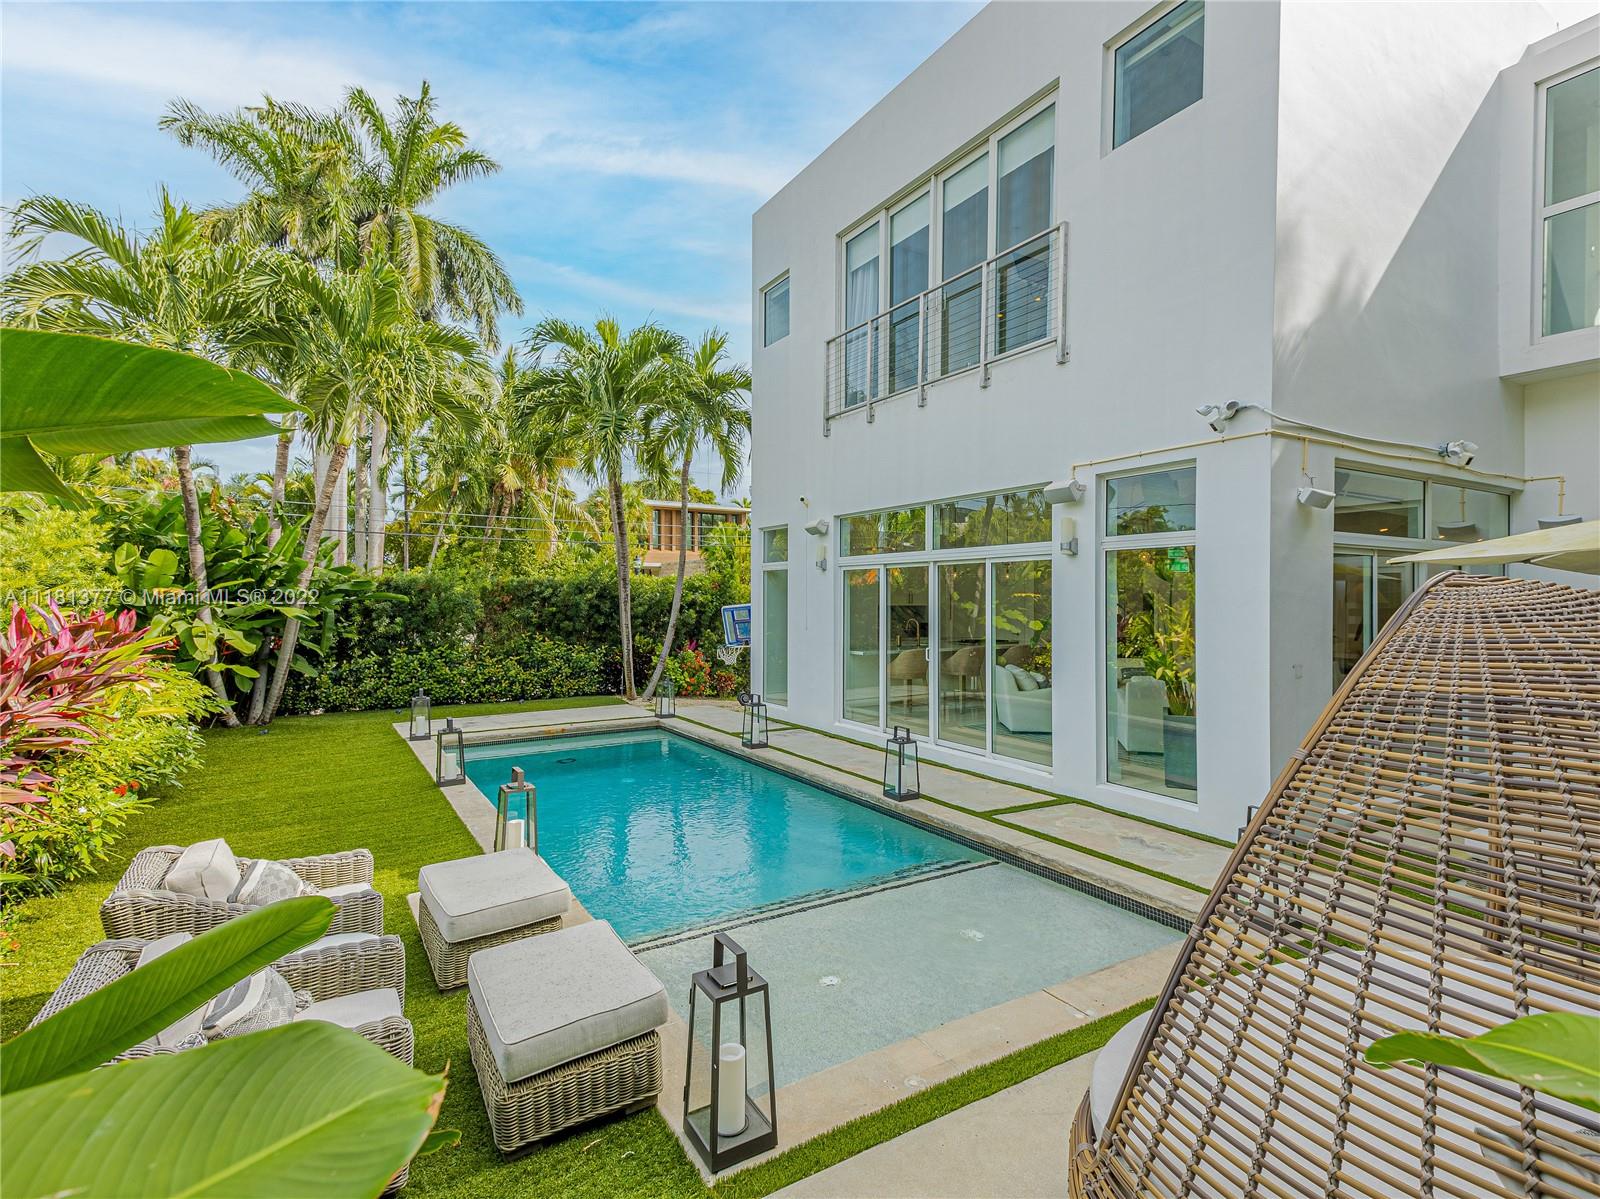 Located in prestigious Venetian Islands, this 2 story Mid-century modern home in an exclusive neighborhood, corner lot with 2 private parkings. Dilido Island is a secluded, exclusive hideaway where the landscape includes 98 homes looking out on Biscayne Bay and only 69 similar luxurious homes tucked away inside the ring of waterfront mansions. Robust Open Living/Dining/Kitchen. Features Master bed upstairs and downstairs, Electronic security cameras, In-home surround sound, Whole-house generator and Water filtration system, Three new air-conditioning units, Salt water pool. Lifestyle - Enjoy memberships at the Standard, Faena Hotel, One Hotel, Miami Beach Golf Club. Only a short drive to Lincoln Road, a swim in the ocean and from the mainland’s Sunset Harbor neighborhood and Yacht Club.